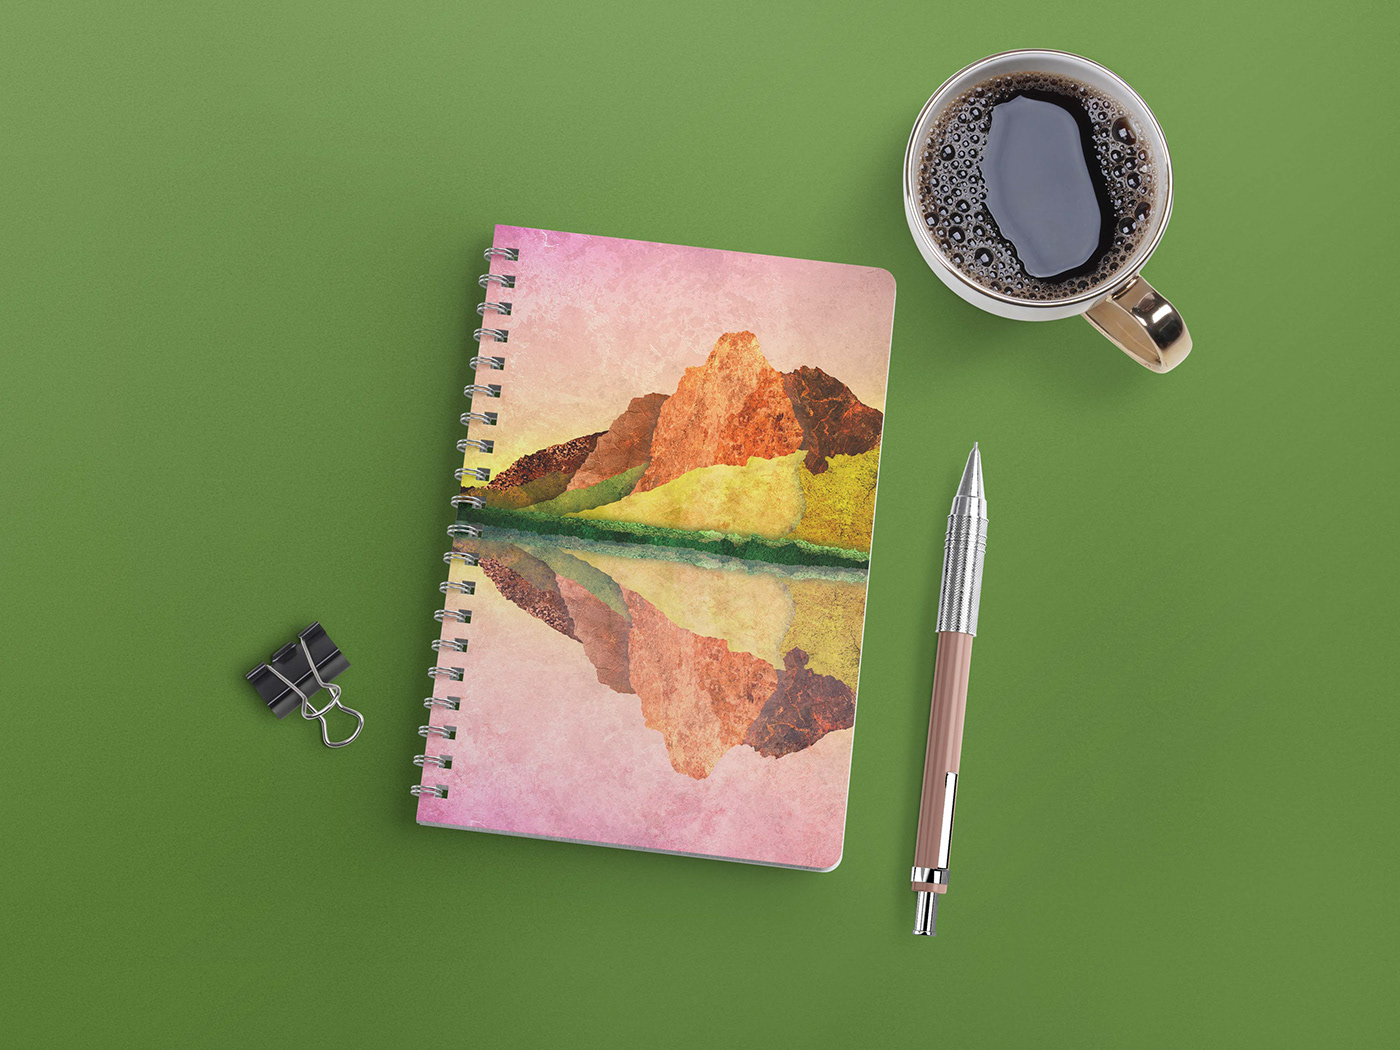 abstract abstraction artwork book Coffee illustrations Landscape mirror notebook reflection